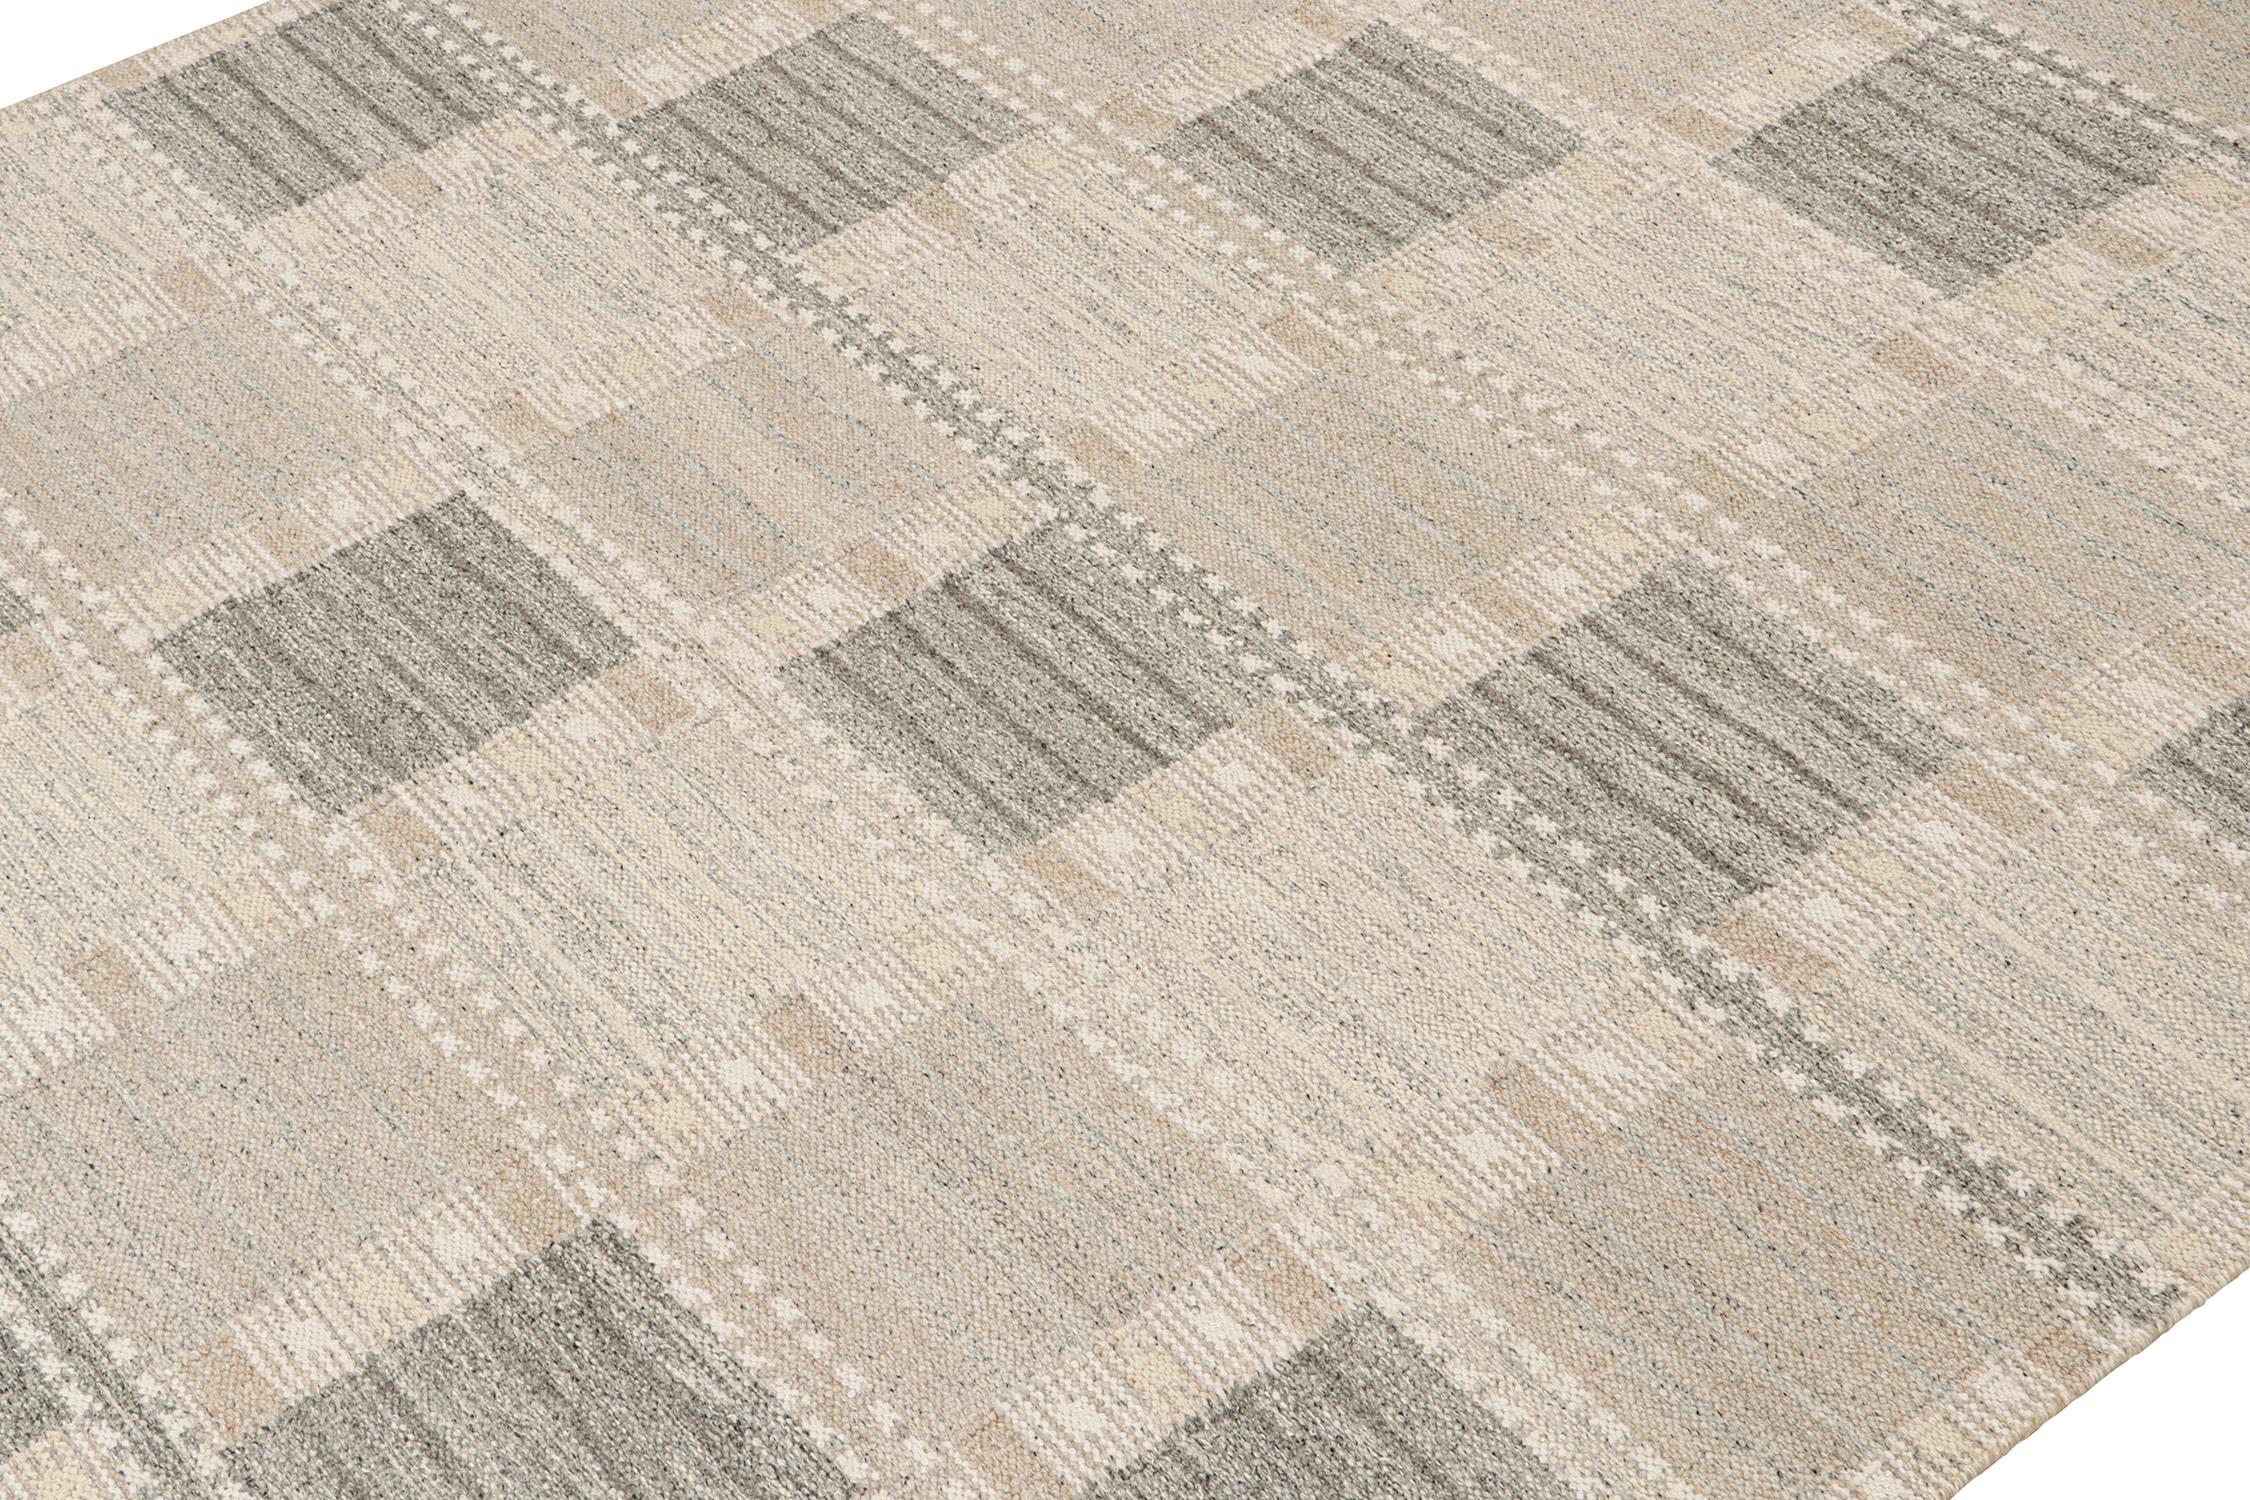 Indian Rug & Kilim’s Scandinavian Style Kilim with Beige and Gray Geometric Patterns For Sale